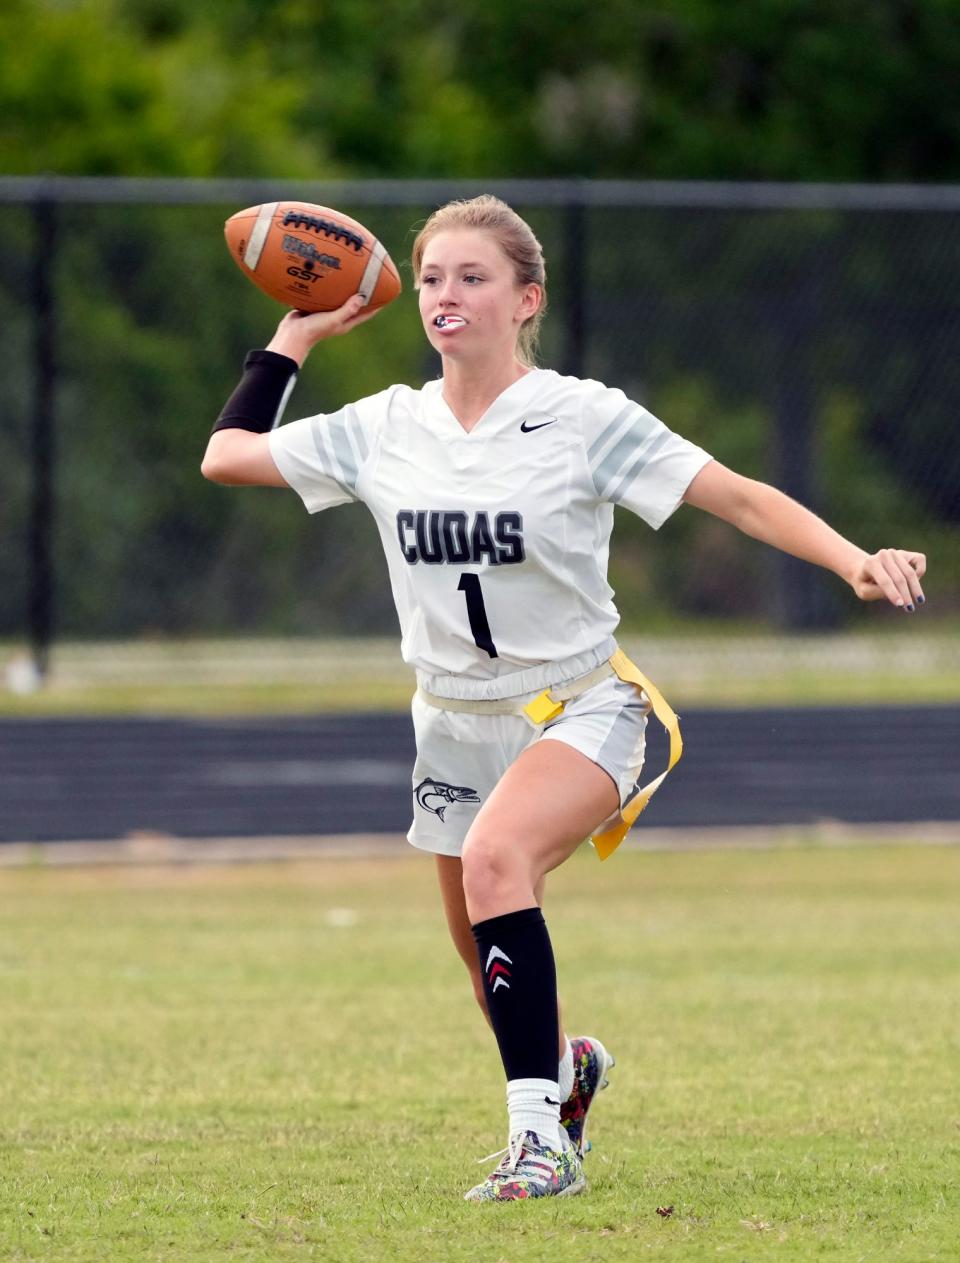 Emma Corr, who surpassed 1,500 rushing and passing yards for the season, threw one touchdown in New Smyrna Beach's 13-7 loss at Timber Creek.